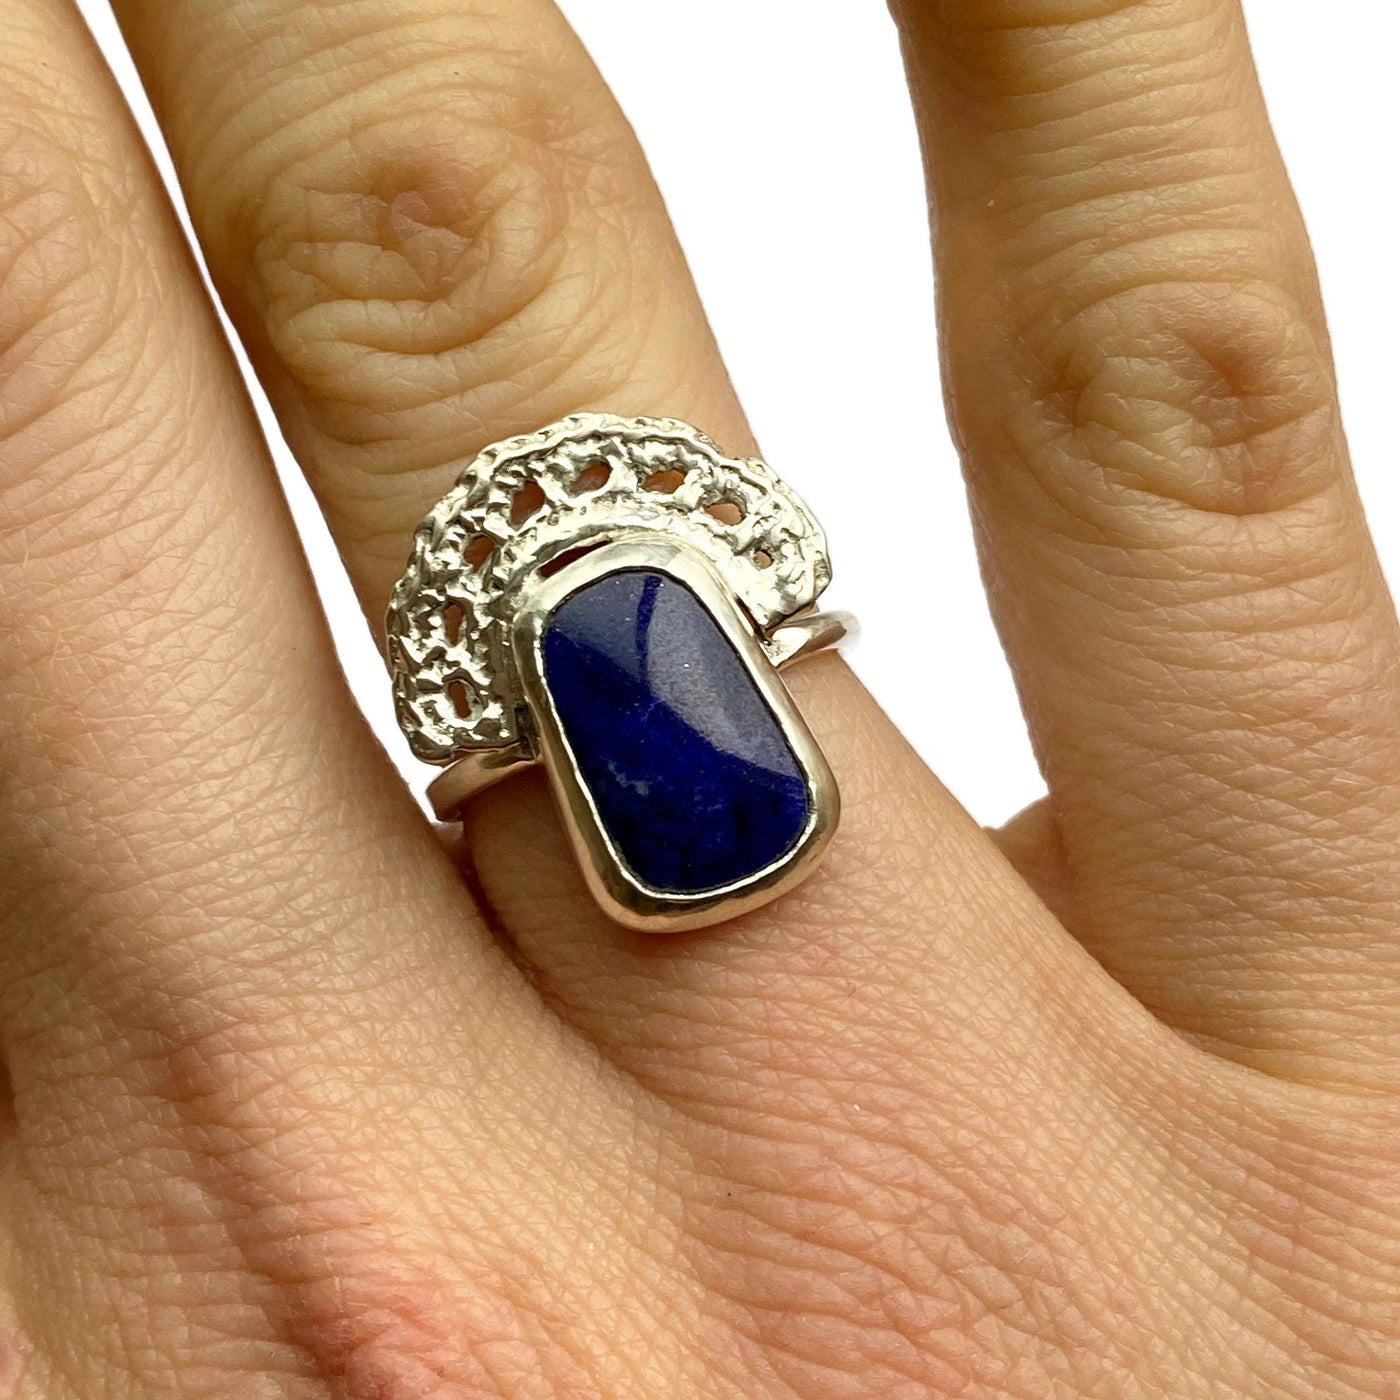 Cast Lace & Lapis Lace Halo Ring // One-of-a-Kind-Rings-Twyla Dill-Seattle Jewelry-Handmade Jewelry-Seattle Jeweler-Twyla Dill